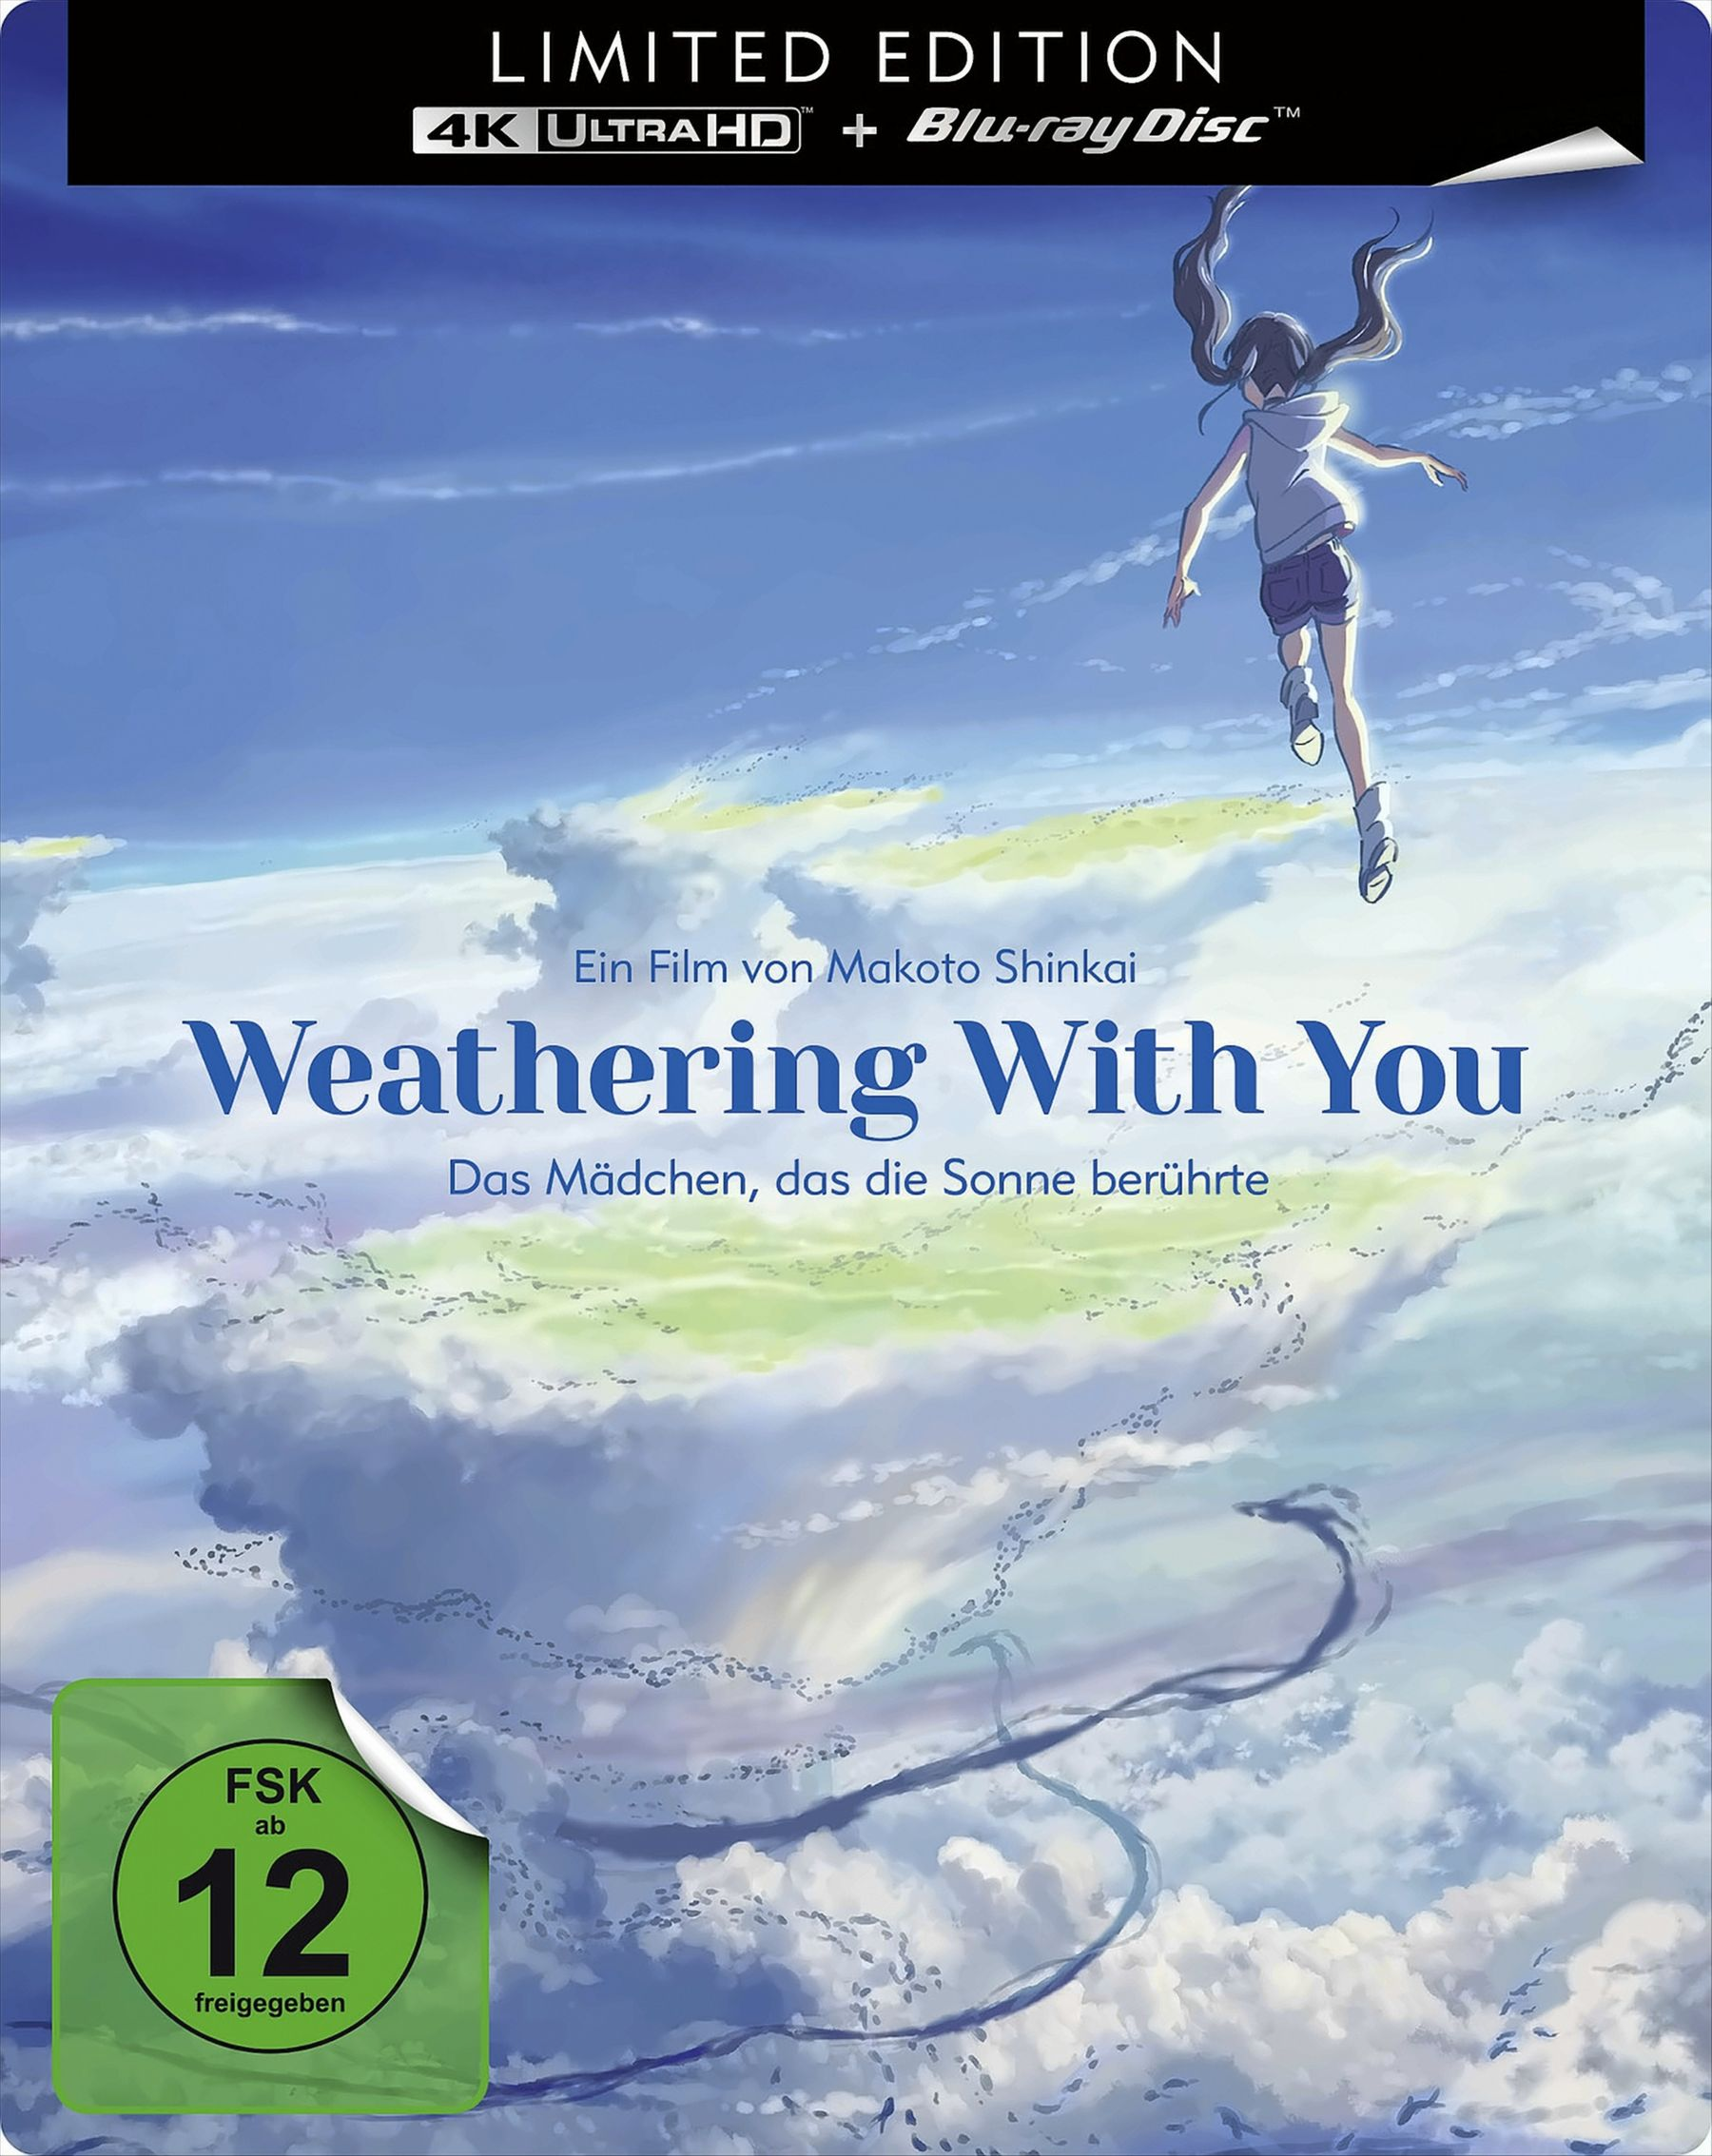 Weathering With You - Edition] (Steelbook) UHD) [Blu-ray] (4K [Limited Blu-ray